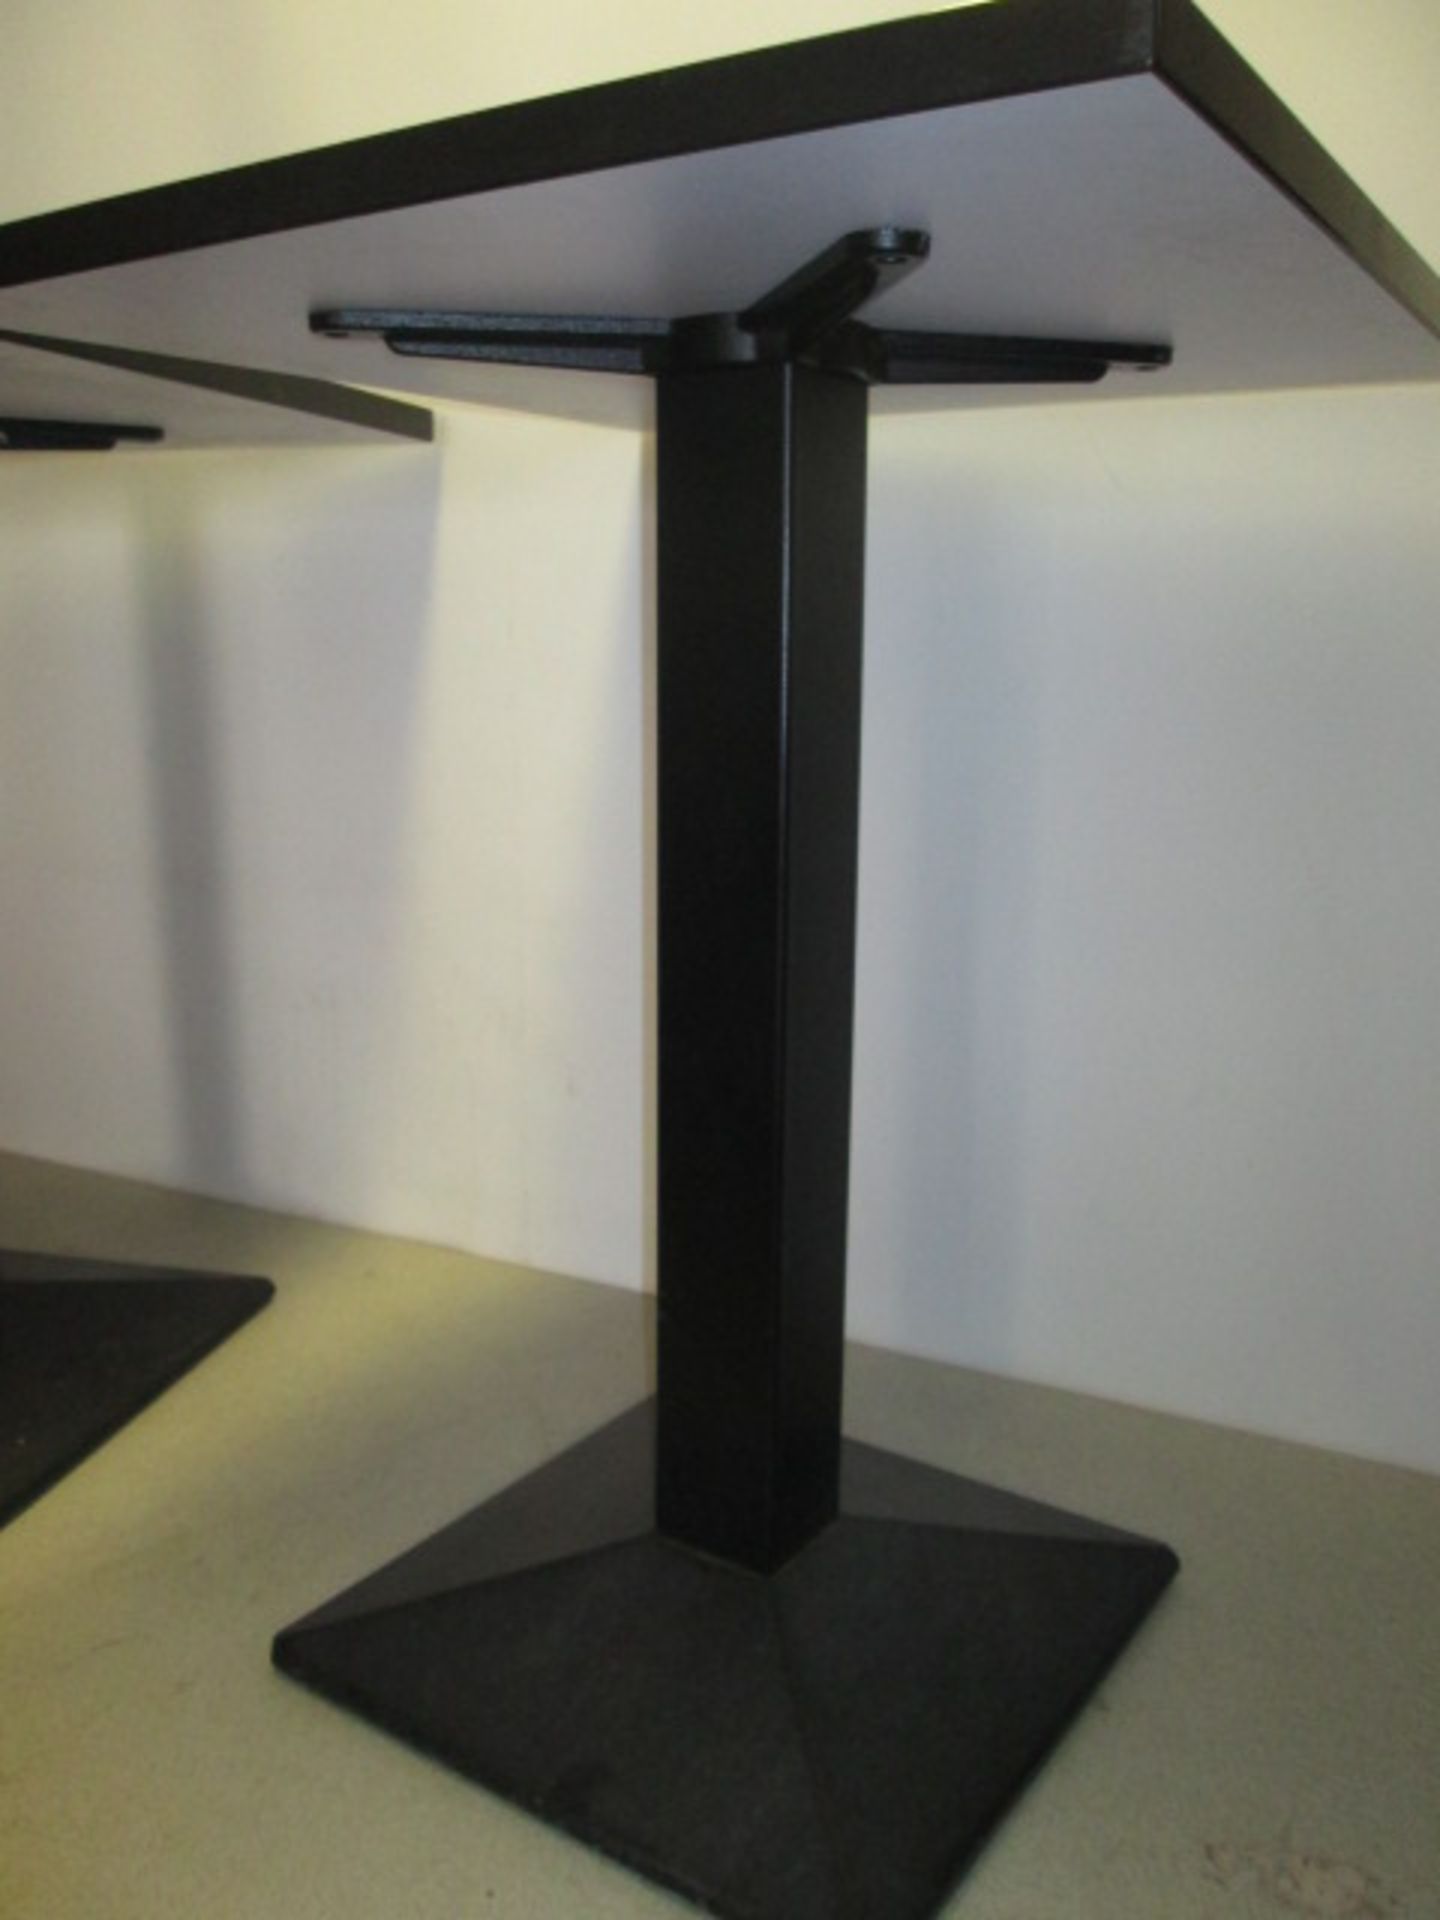 2 x Pedrali Quadra 4160 Wood Topped Restaurant Table on Cast Iron Support & Base, 60cm x 60cm - Image 3 of 3